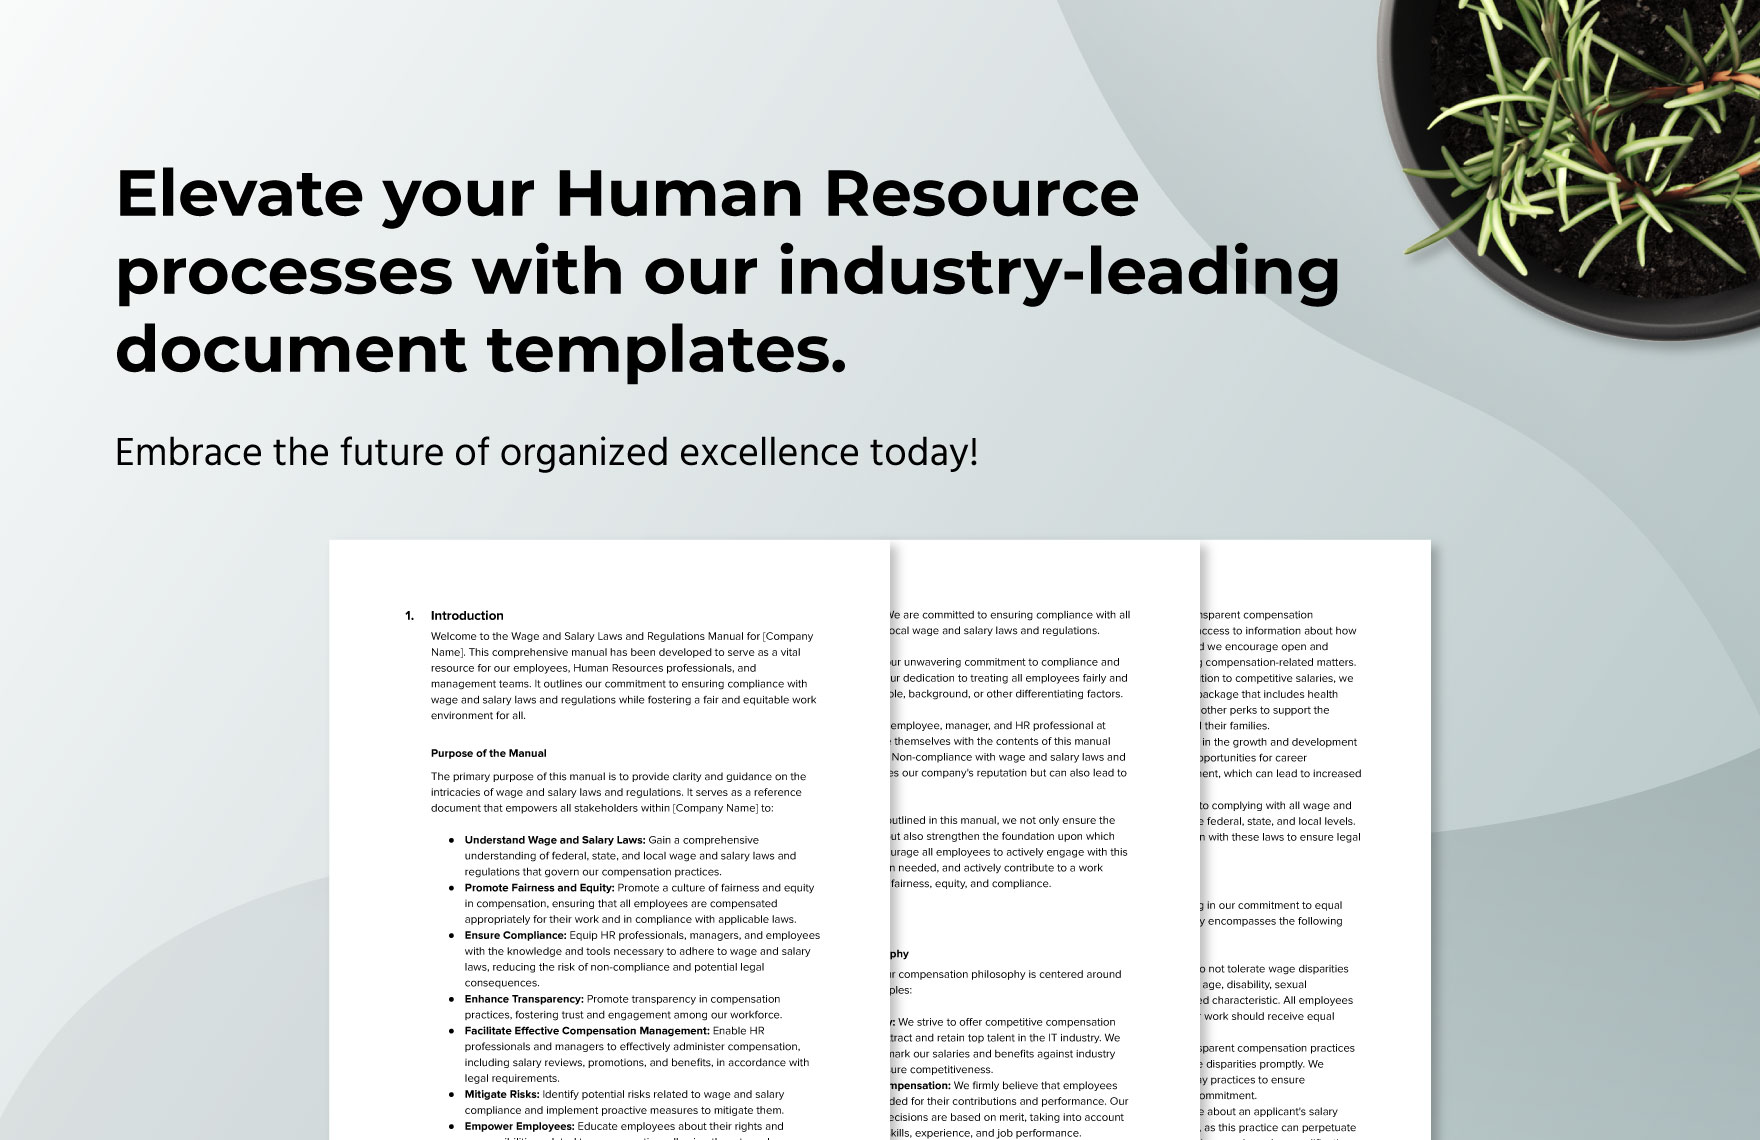 Wage and Salary Laws and Regulations Manual HR Template